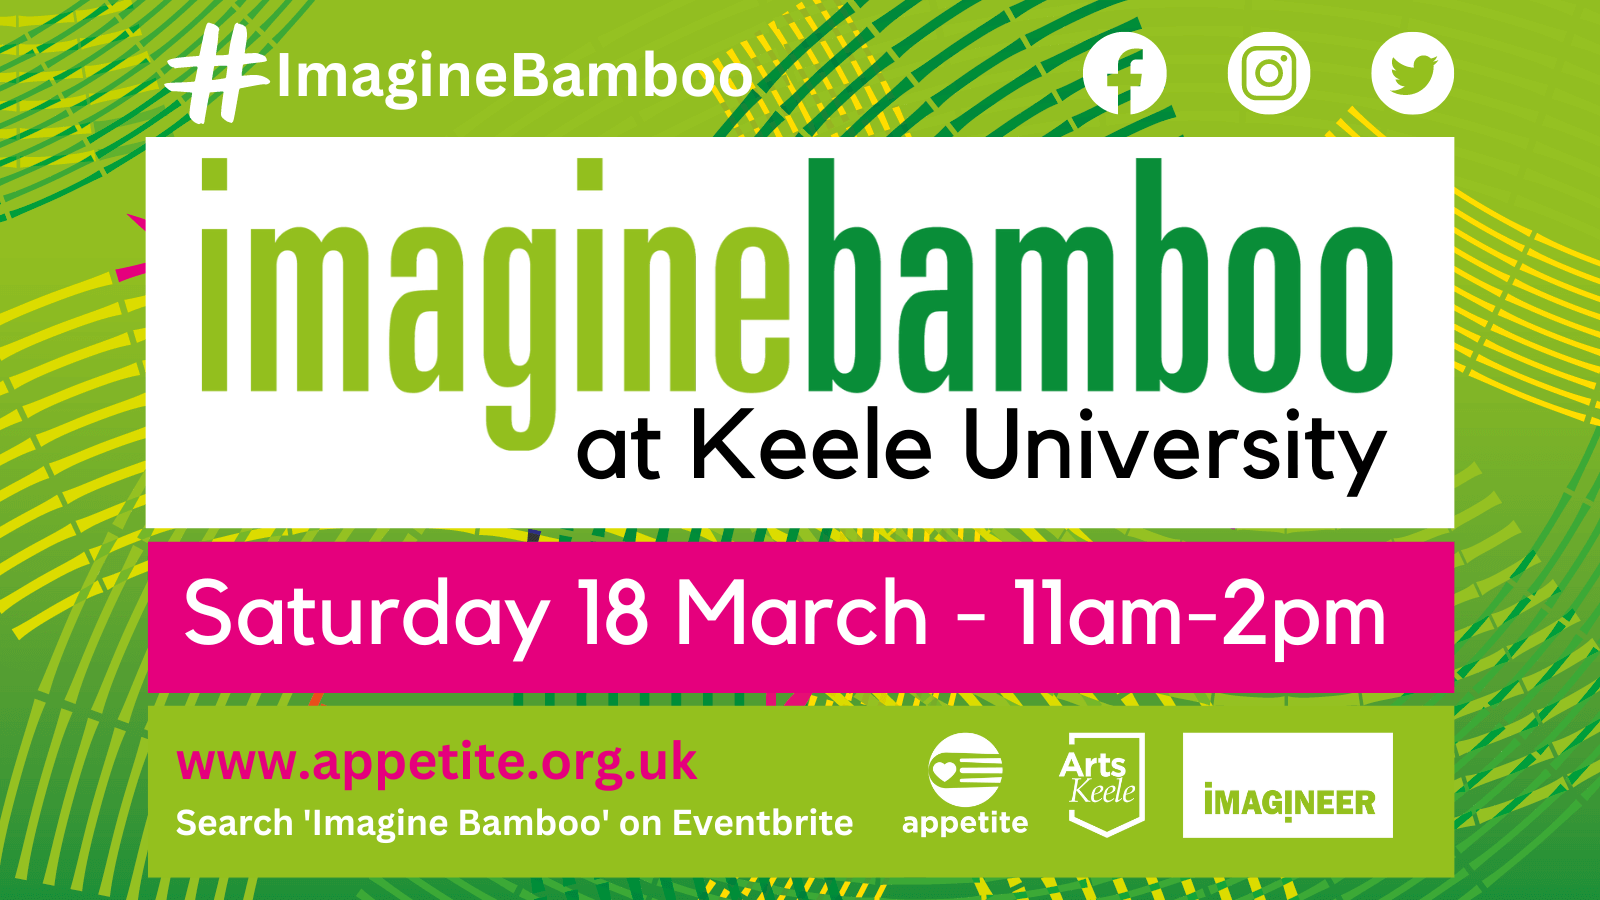 Text on green background reading Imagine Bamboo at Keele University Satruday 18 March 11am - 2pm. #imaginebamboo. www.appetite.org.uk search Imagine Bamboo on eventbrite. Three logos including Appetite, Imagineer and ArtsKeele. 